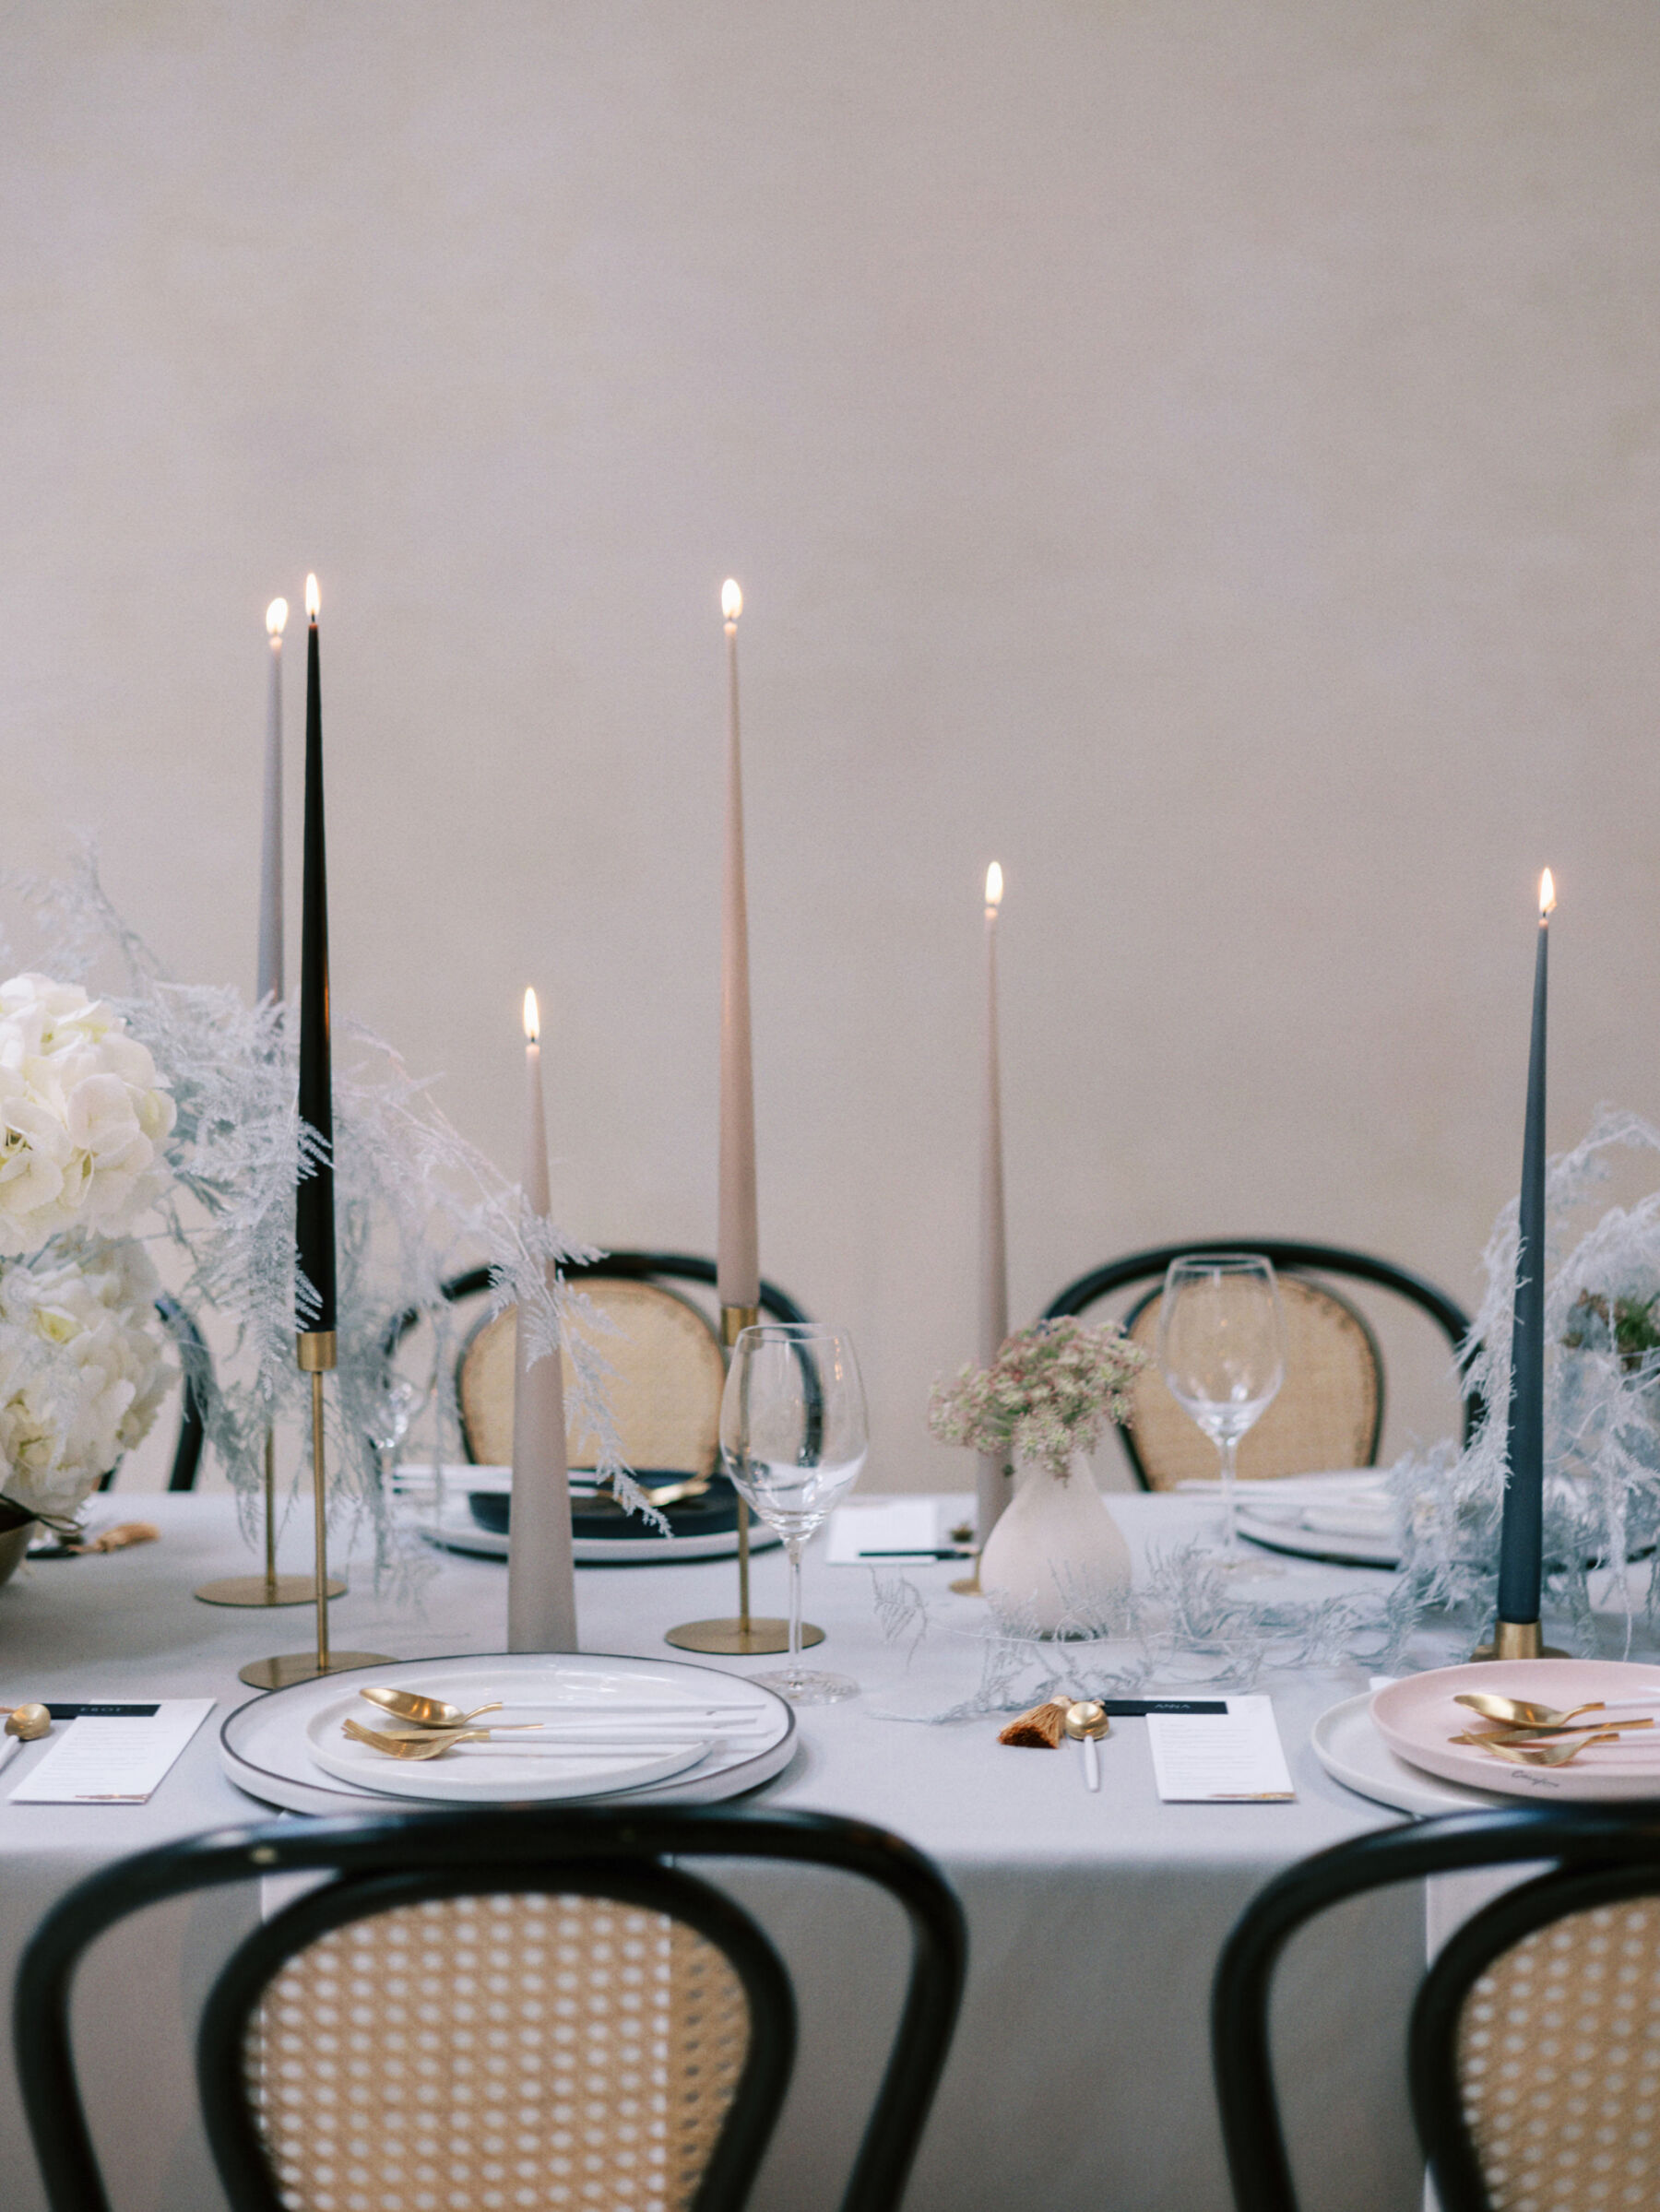 Tall tapered candles by Ester & Erik